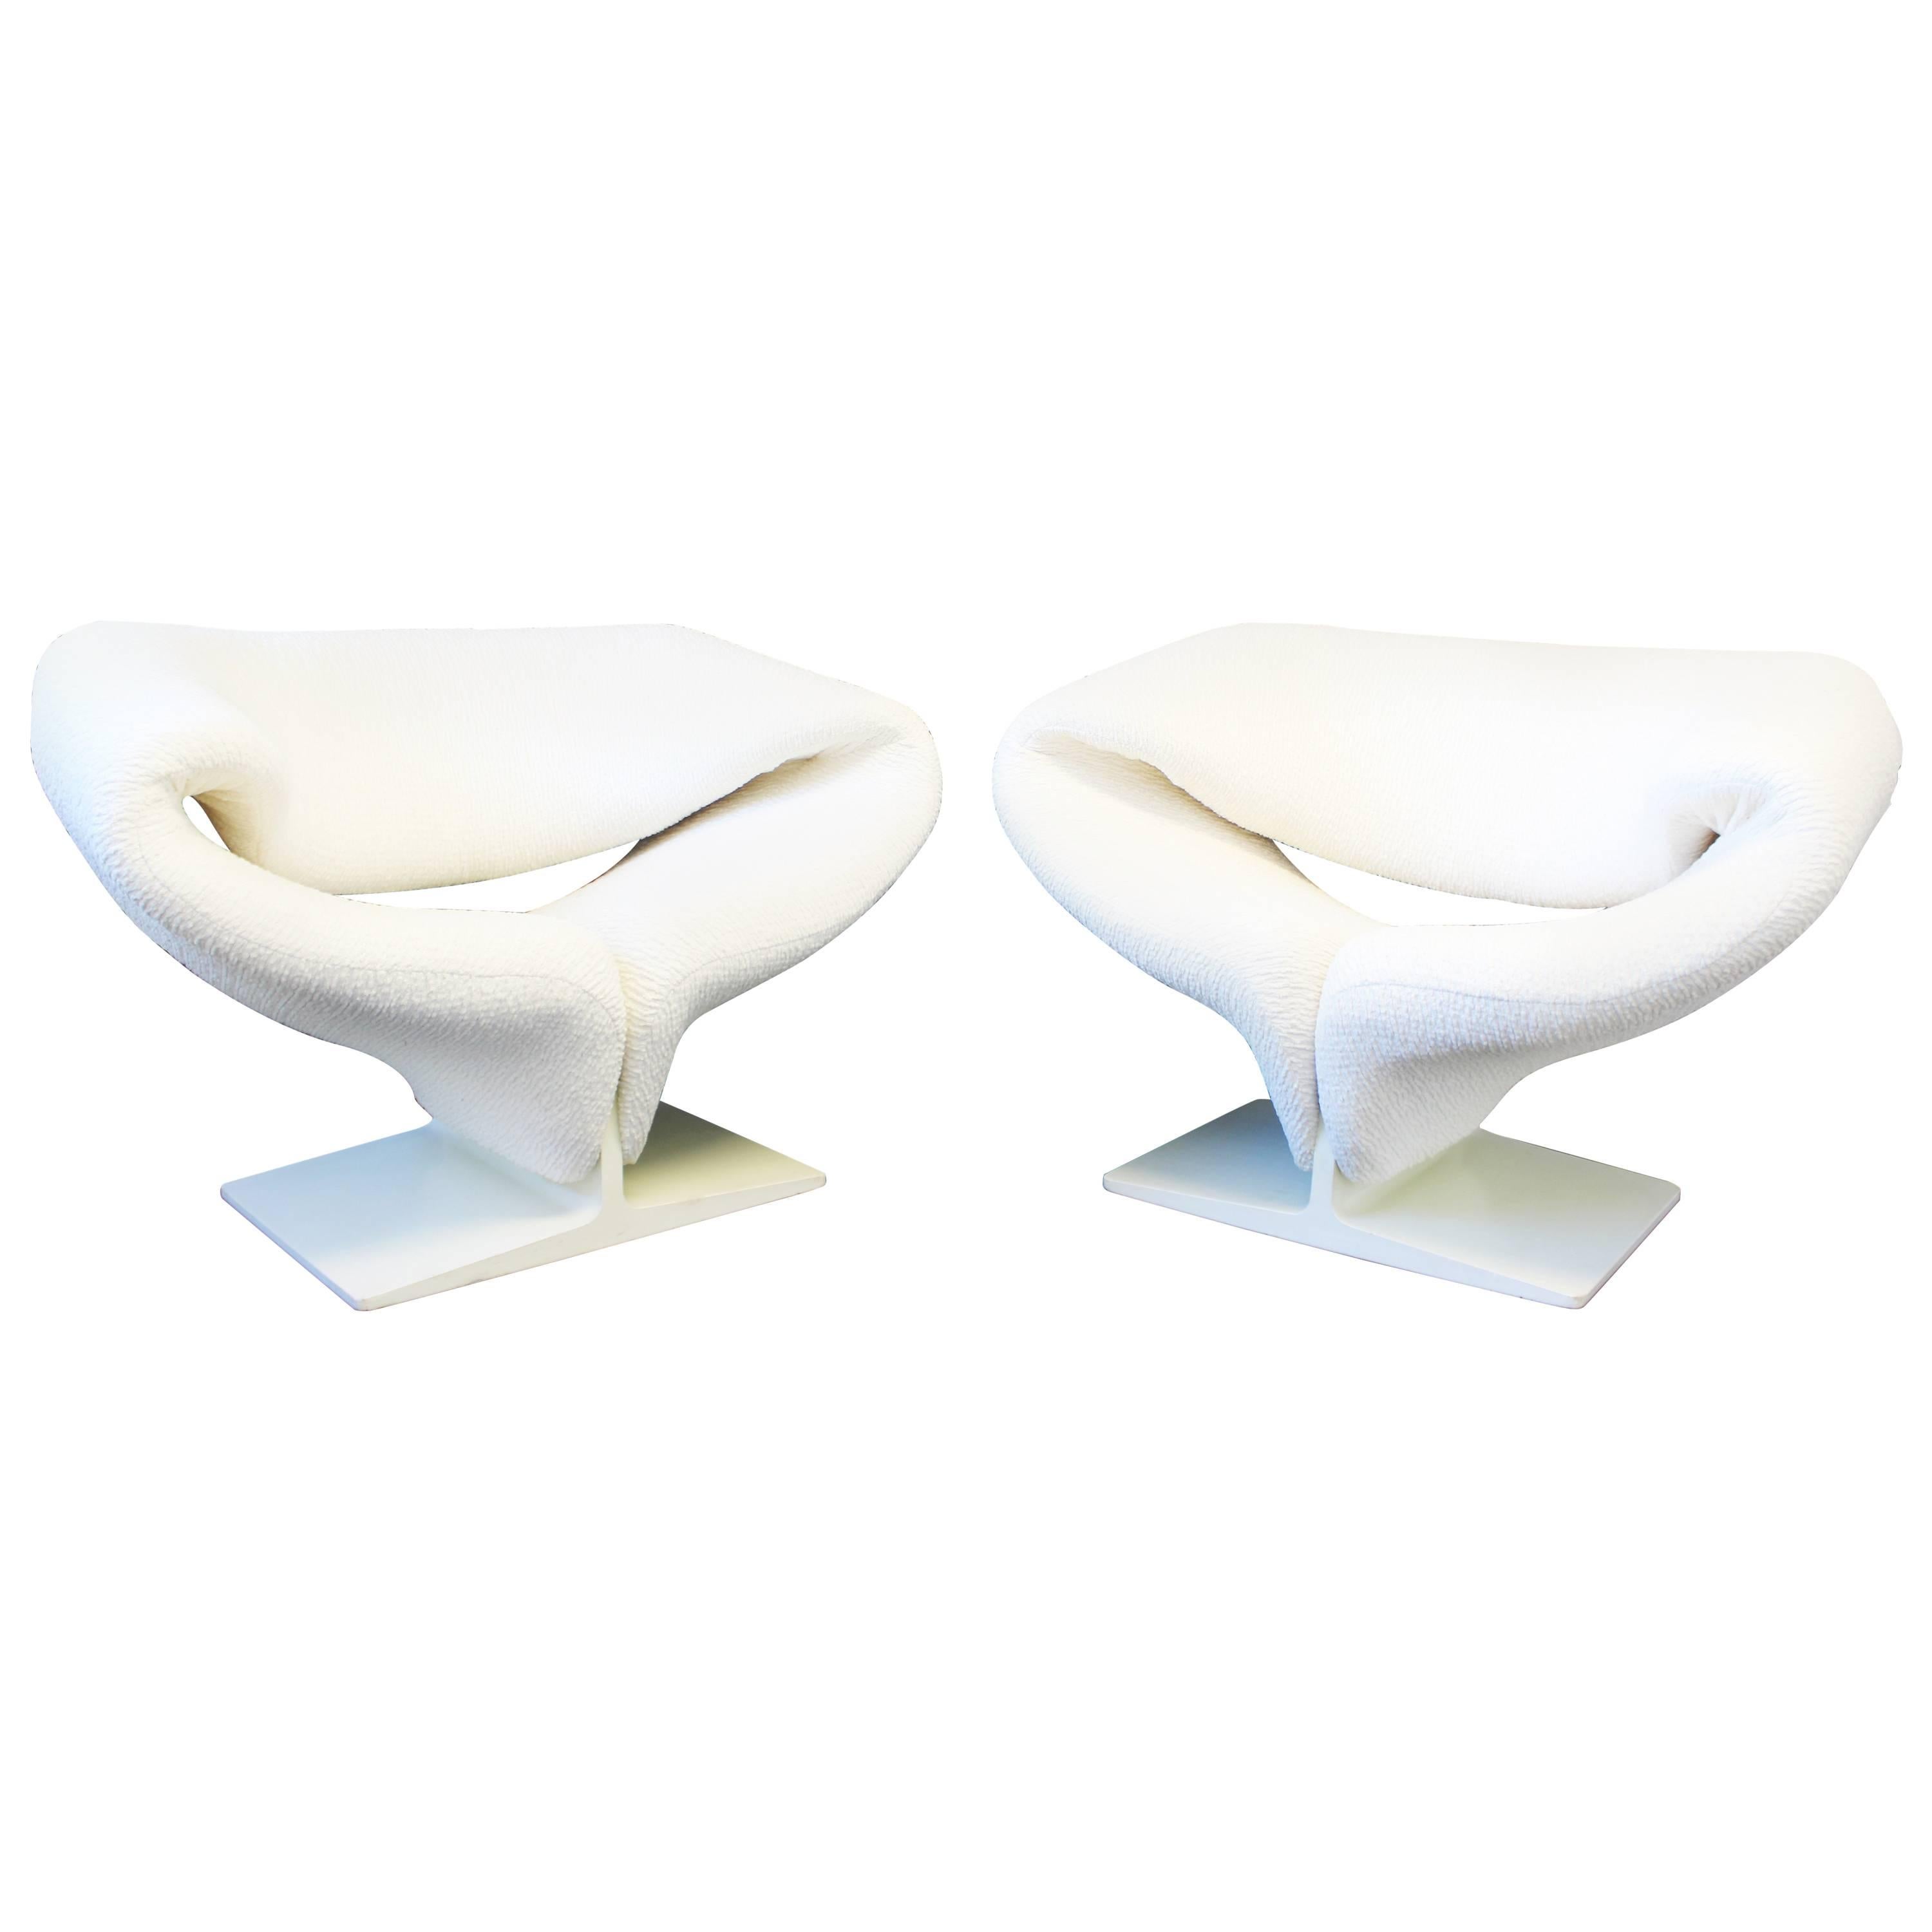 Signed Pair of Pierre Paulin Ribbon Chairs by Artifort, France